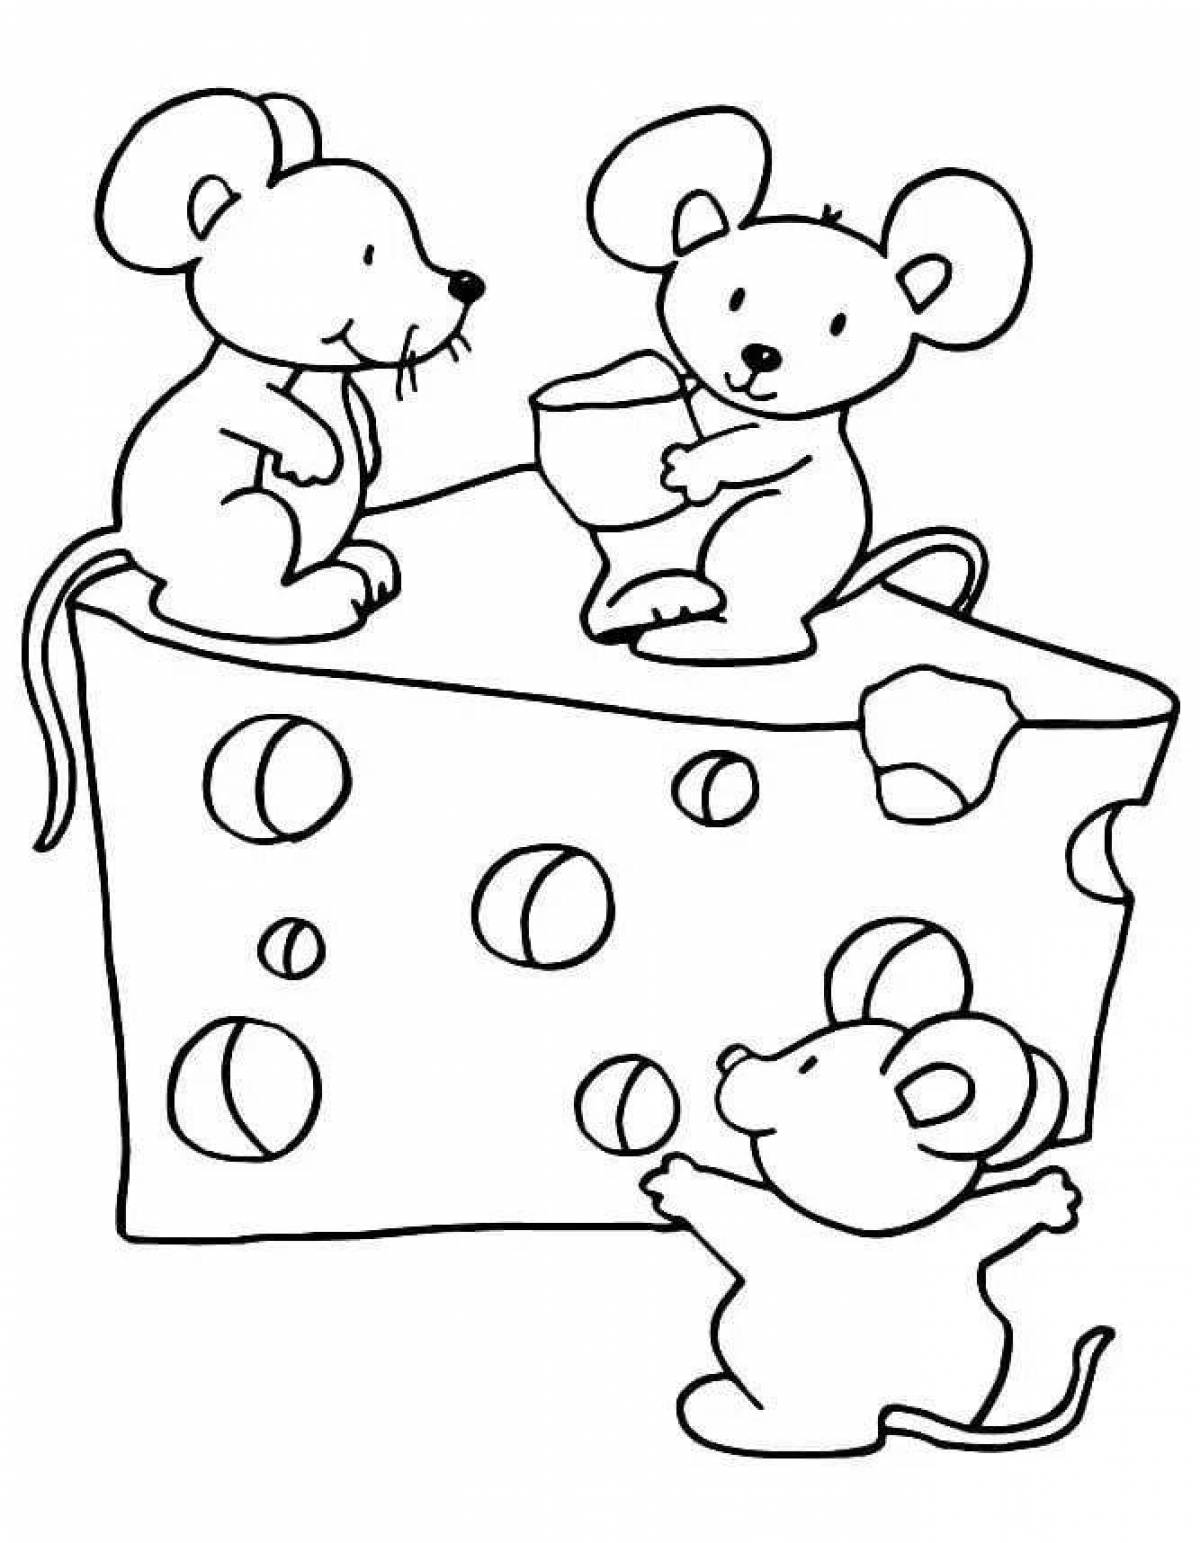 Coloring playful mouse with cheese